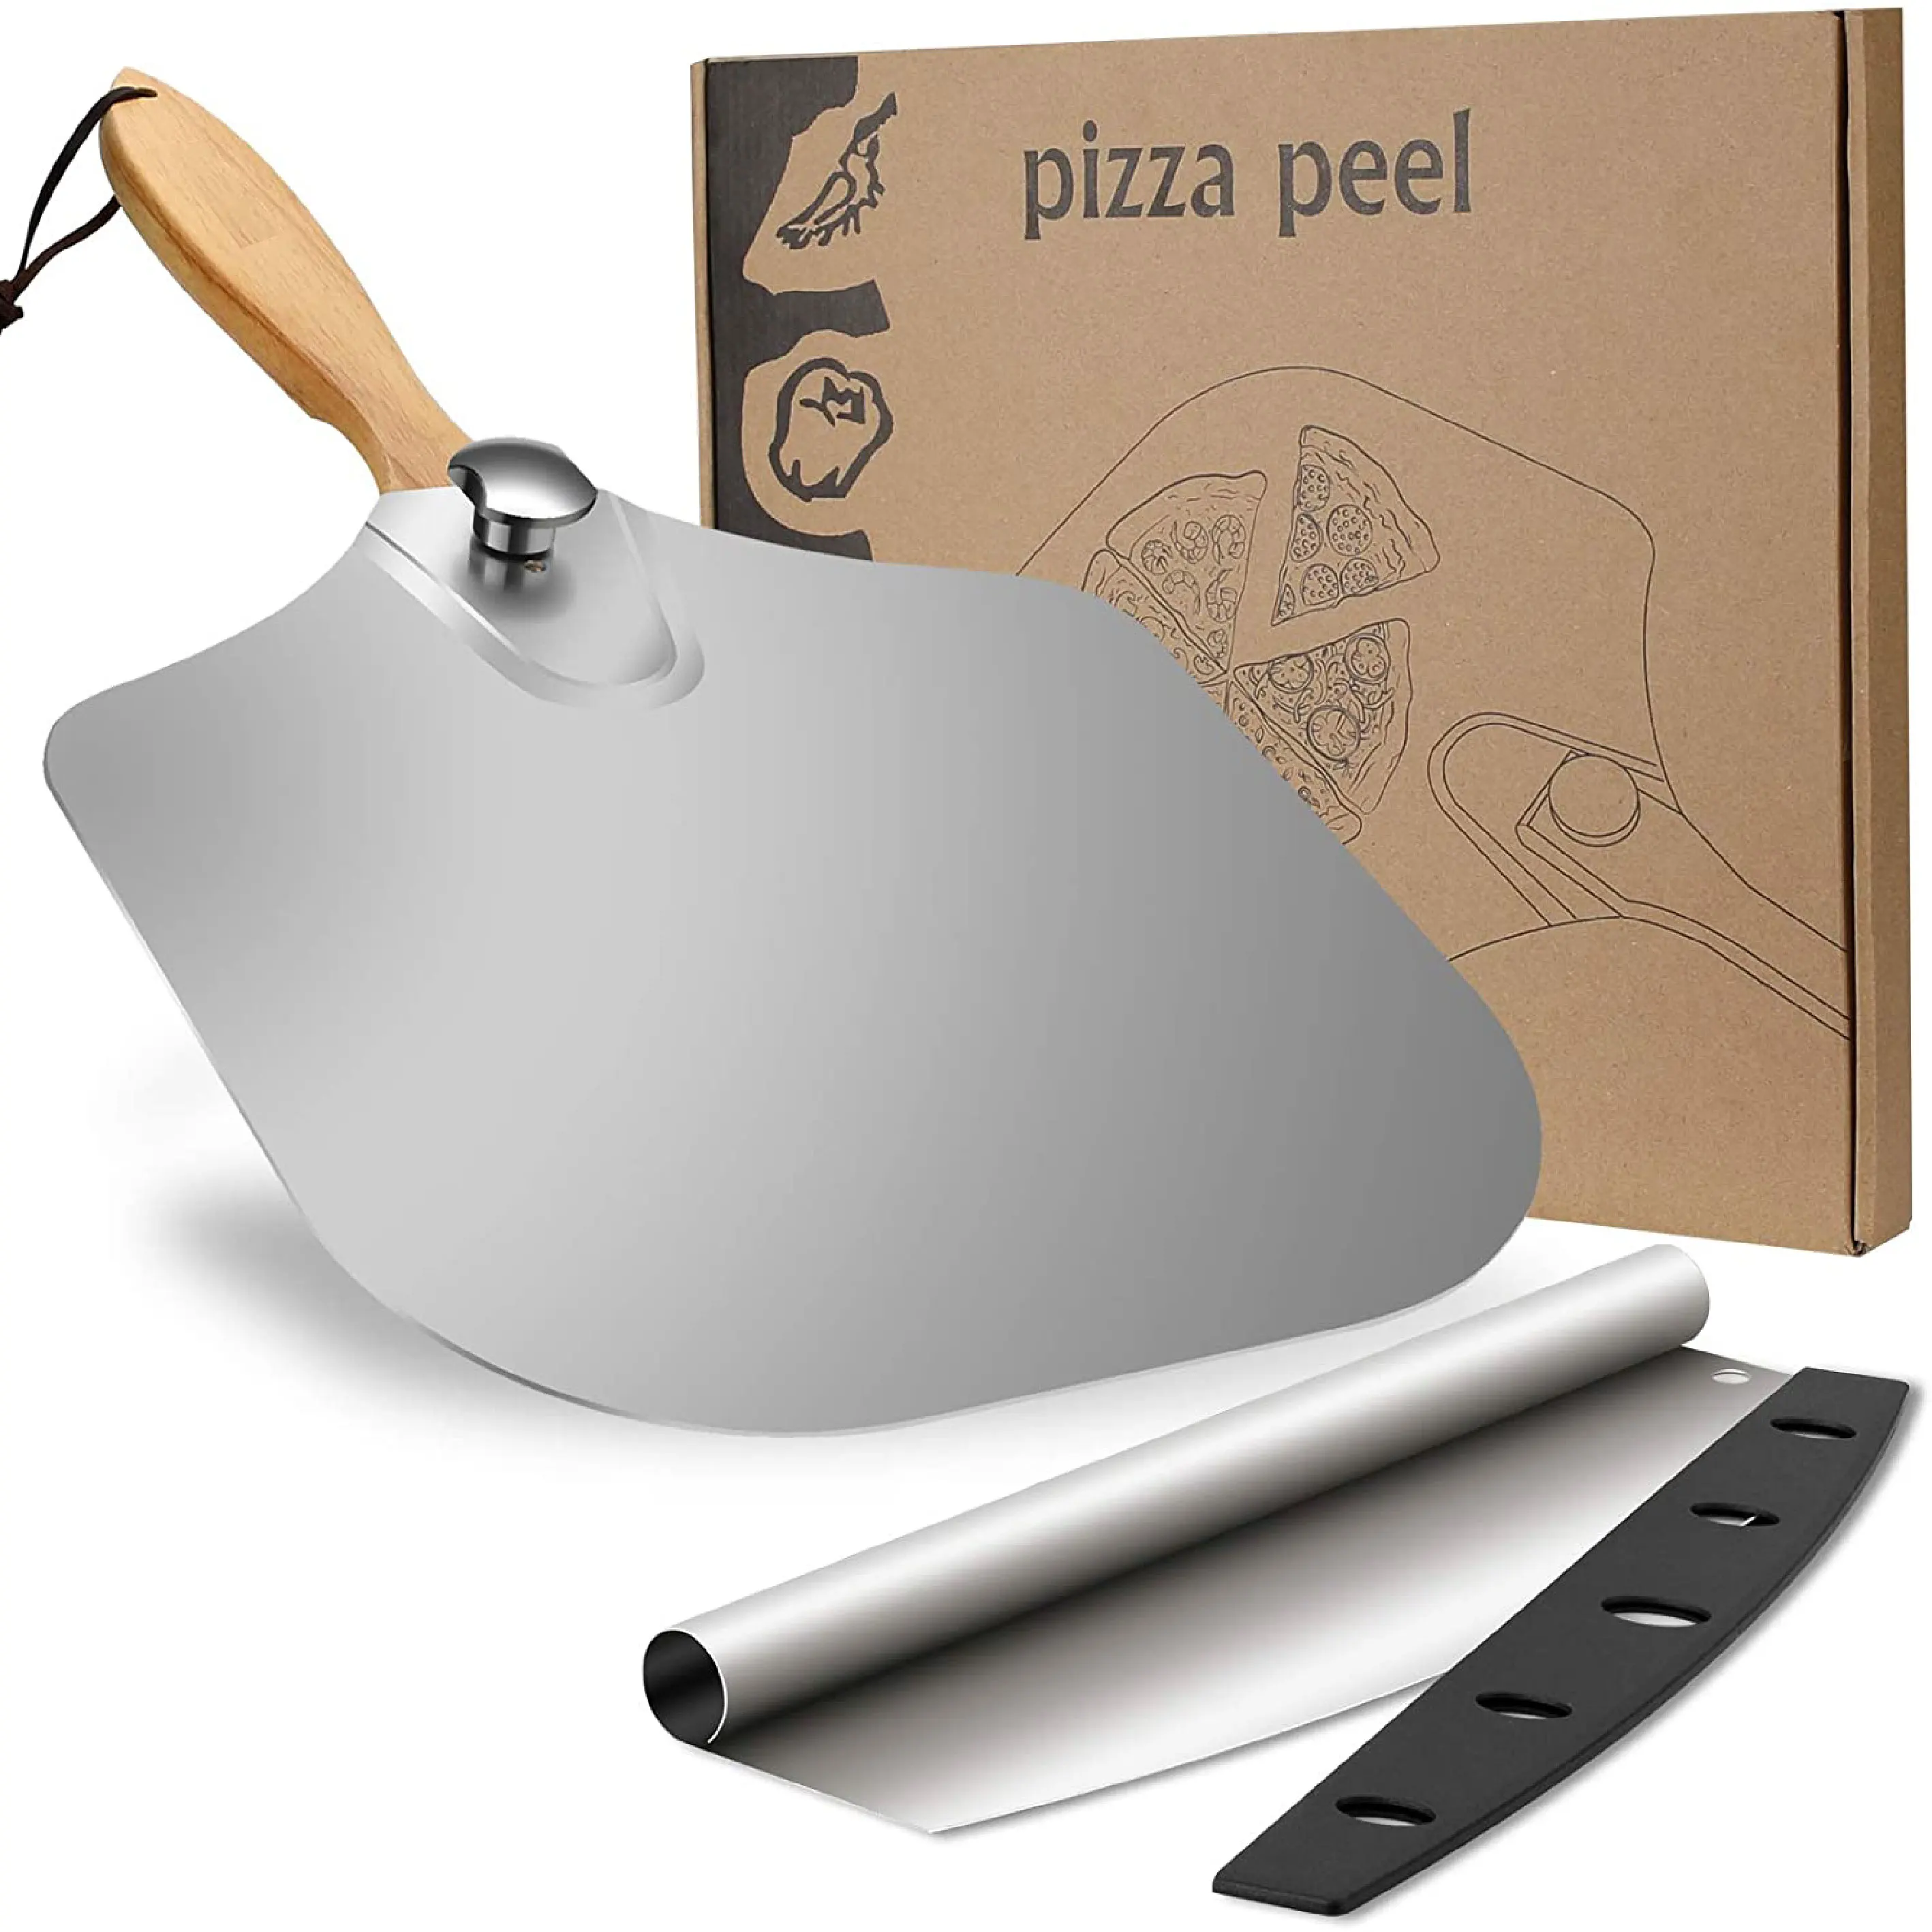 

Premium 12 x 14 Inch Foldable Rubber Wood Handle Aluminum Paddle Metal Pizza Peel Shovel with cutter